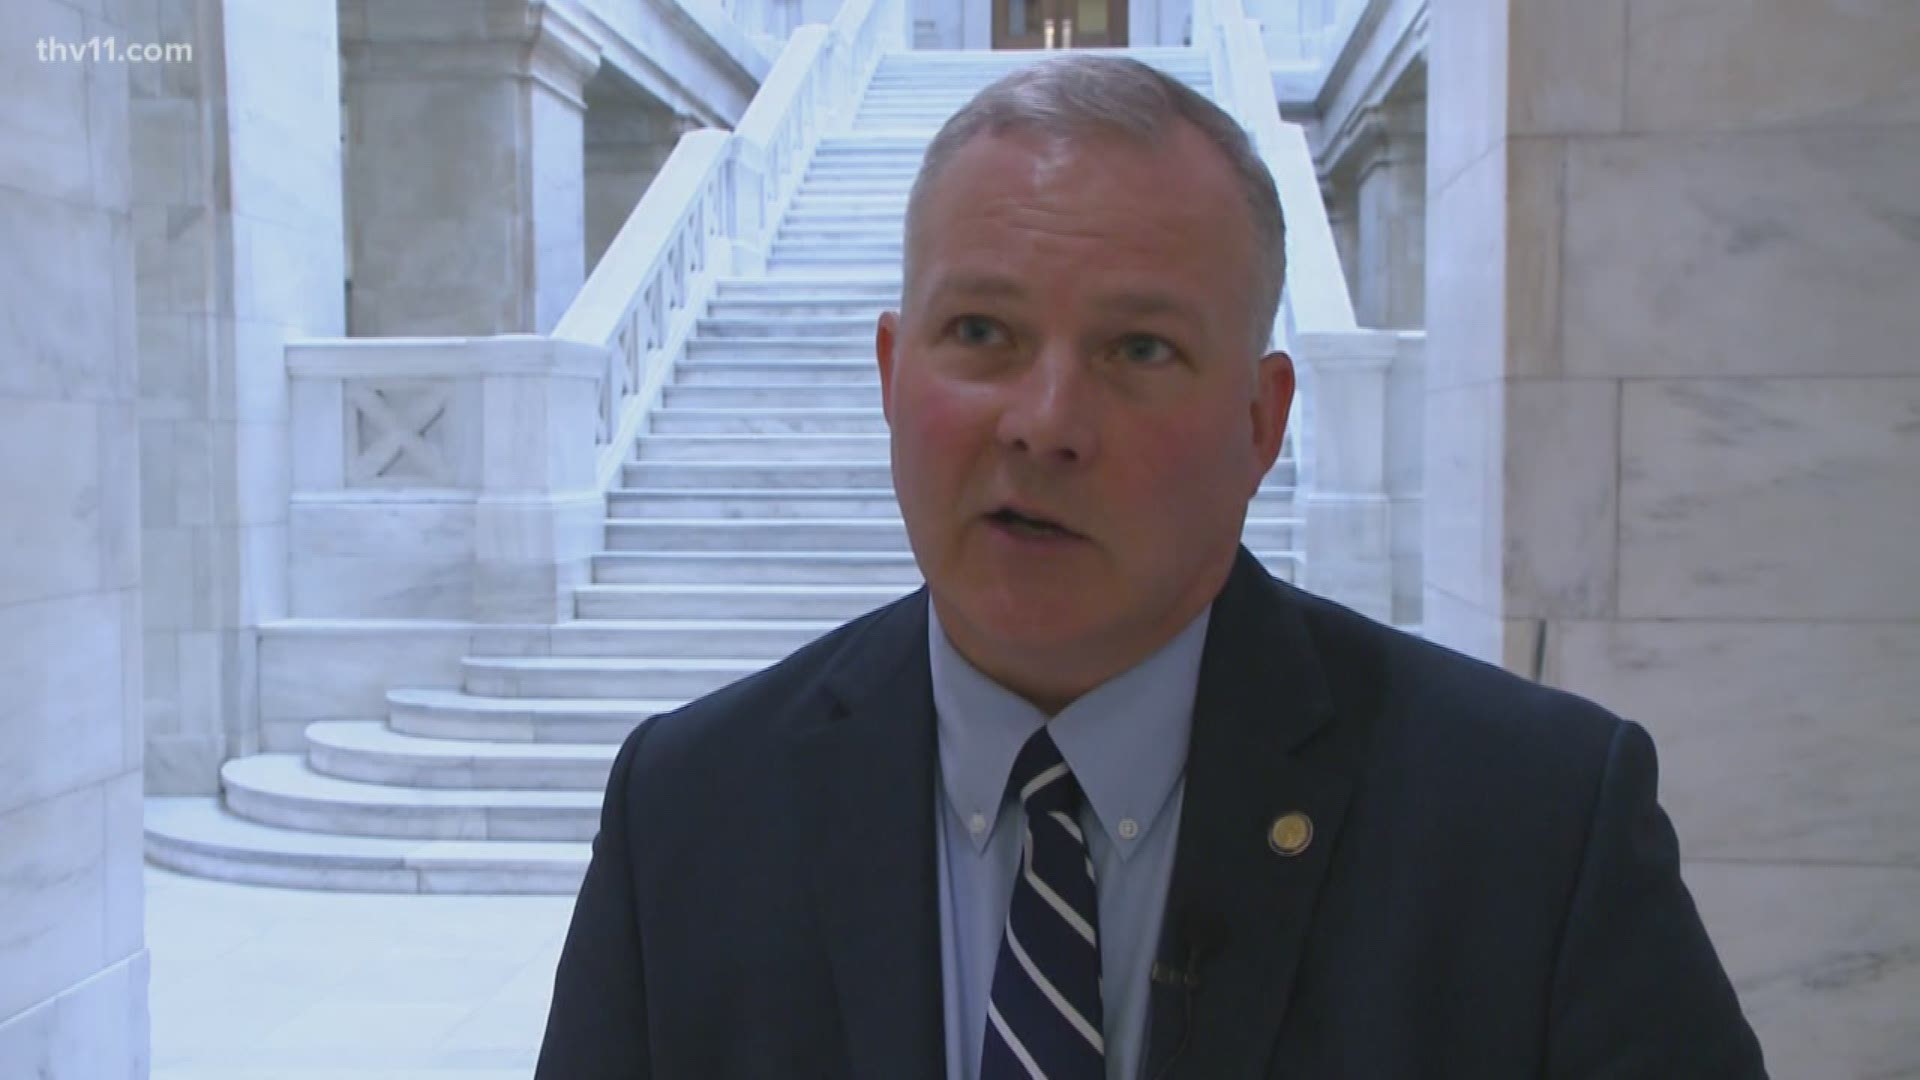 Arkansas Lt. Governor Tim Griffin says he's running for governor in 2022. He's the first candidate to announce a bid for the office.